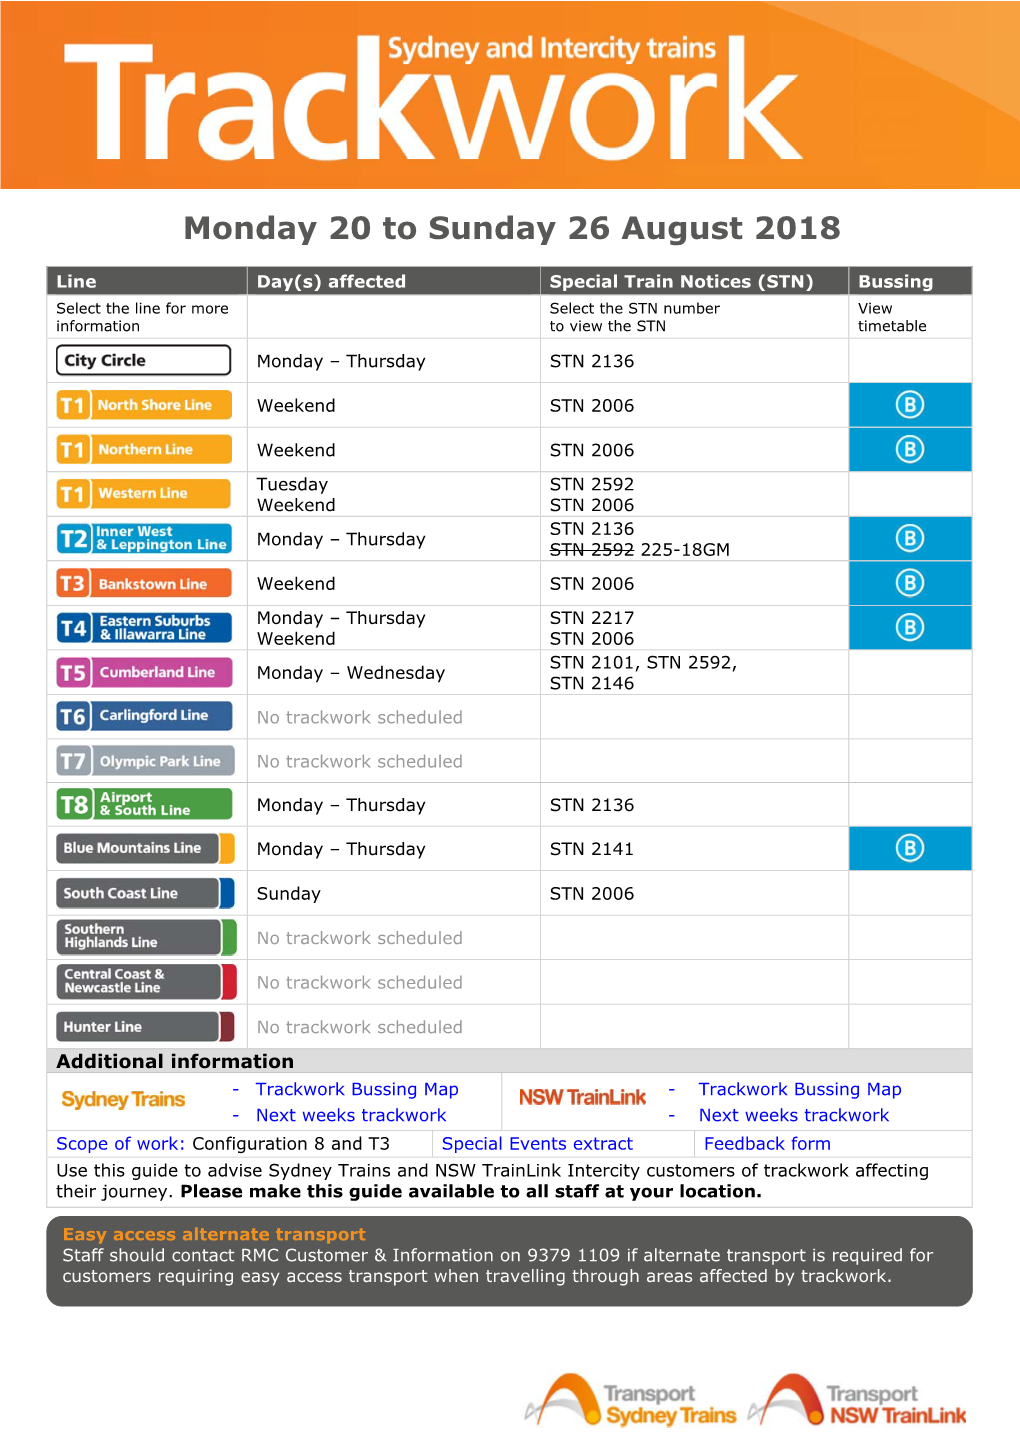 Monday 20 to Sunday 26 August 2018